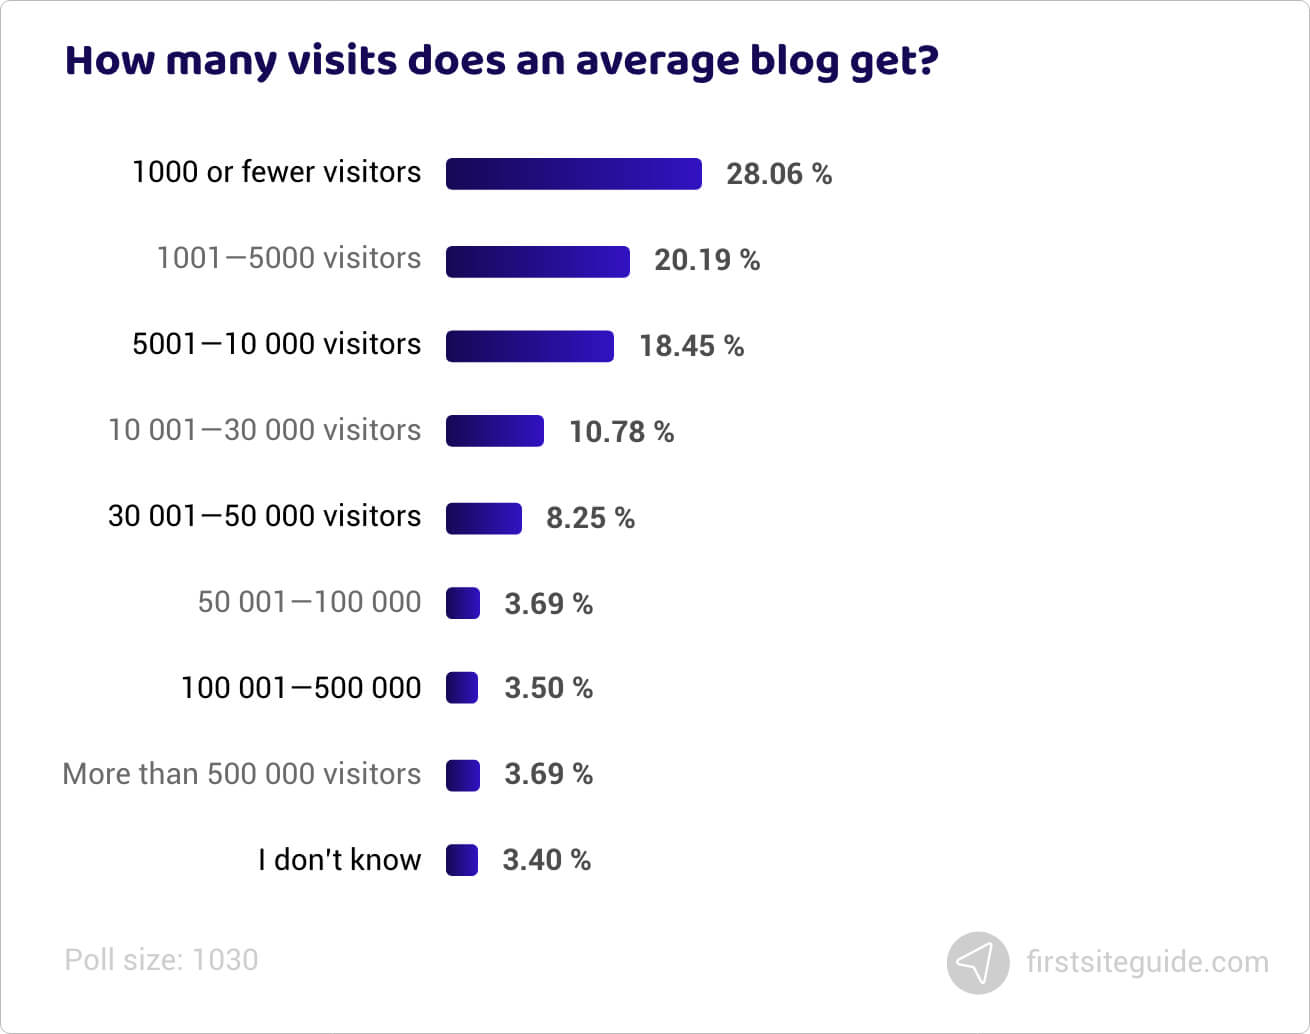 How many visits does an average blog get